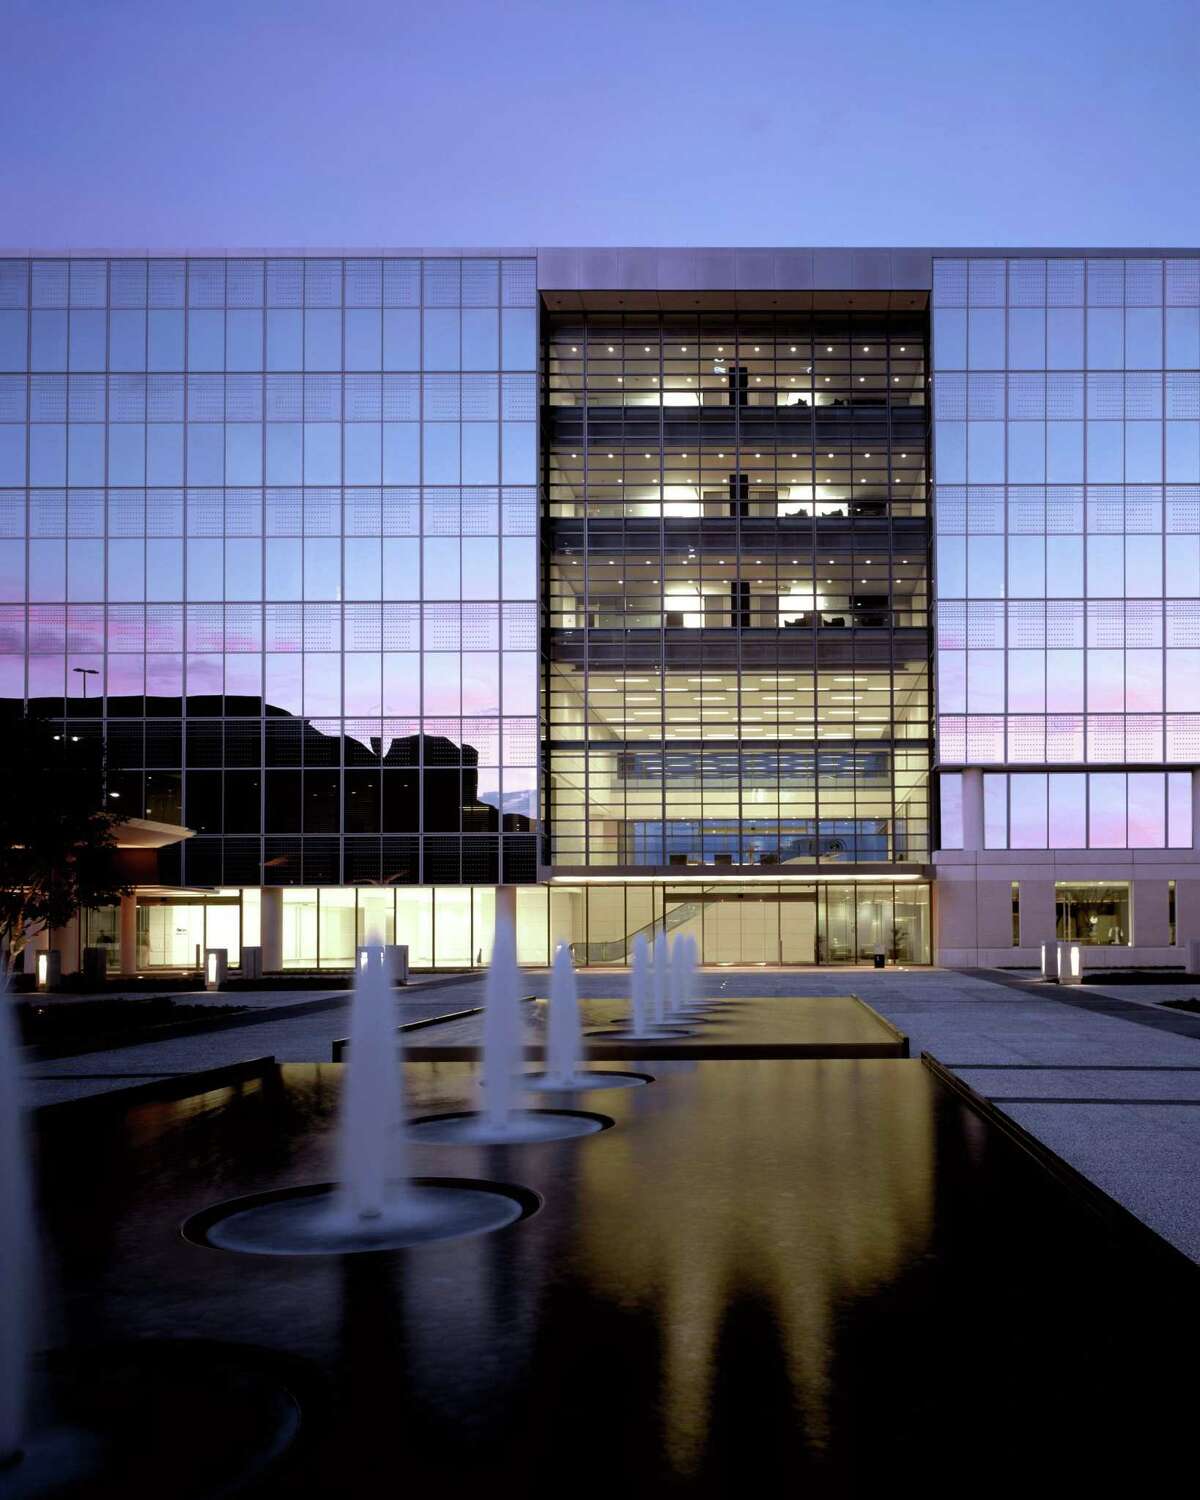 Bechtel, a major engineering, construction and procurement firm, is relocating its Houston offices into CityWestPlace in the Westchase area of Houston.